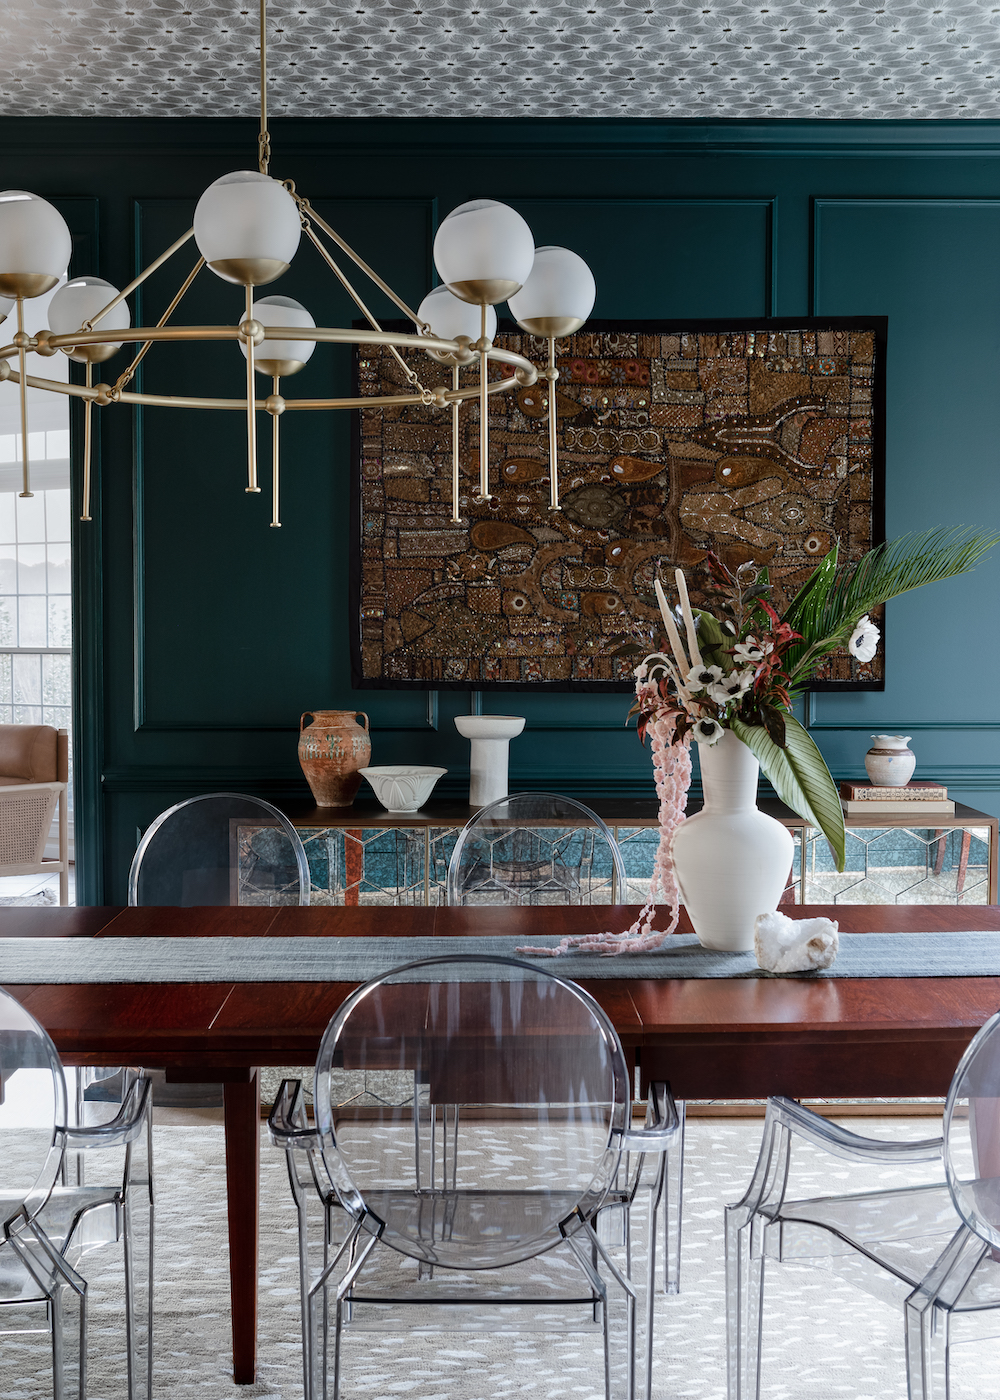 So You Want to Host Thanksgiving…(A Designer’s Guide to Planning Your Space)